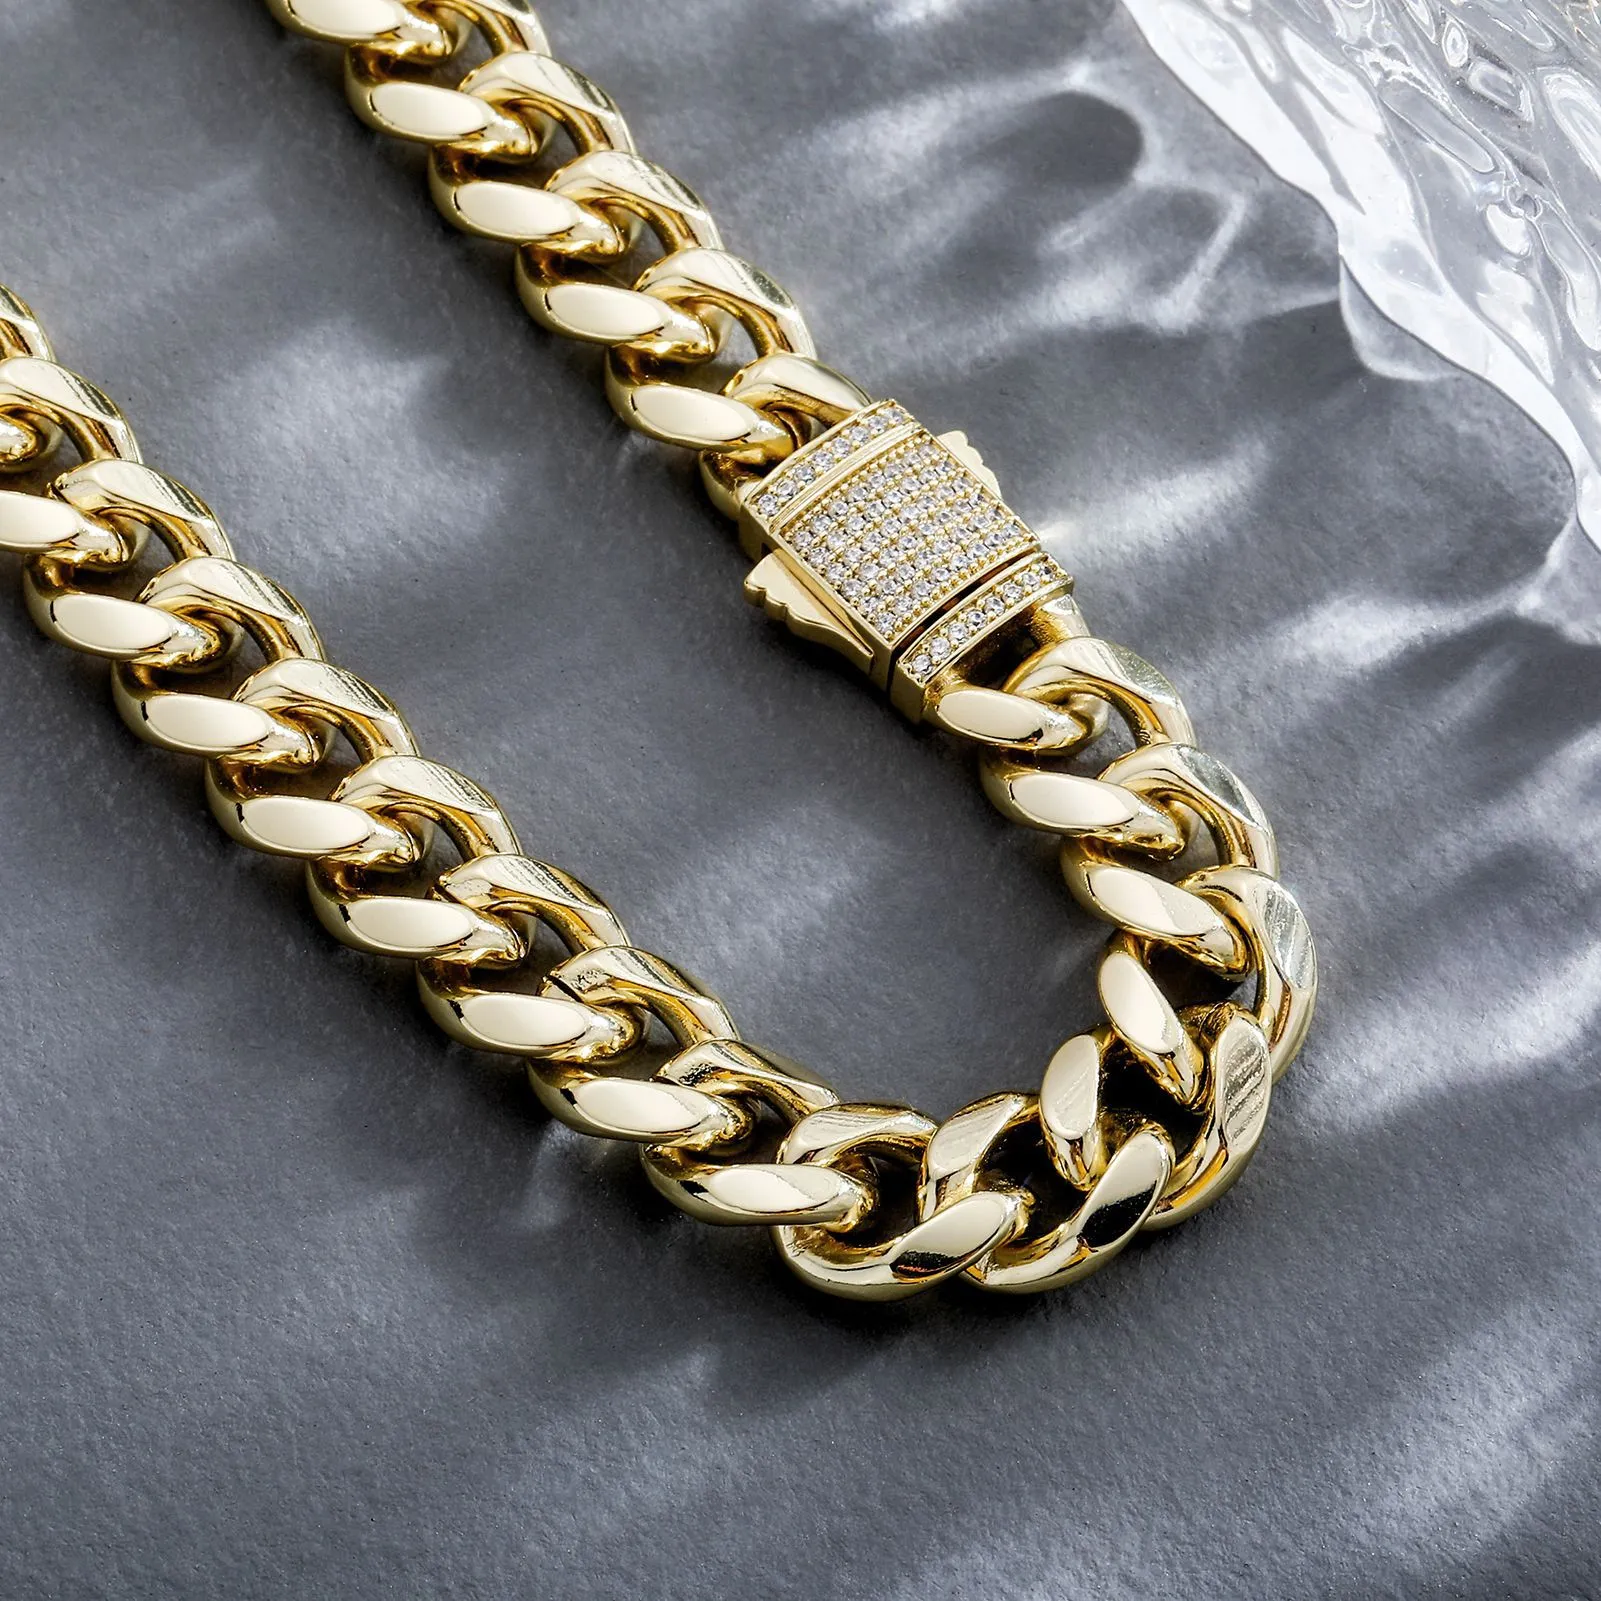 Fine Quality 10mm Spring Clasp Cuban Link Chain Necklace Choker Bracelet Personalized Cubic Zirconia Miami Curb Chains Bling Hip Hop Rapper Jewelry Gifts for Men